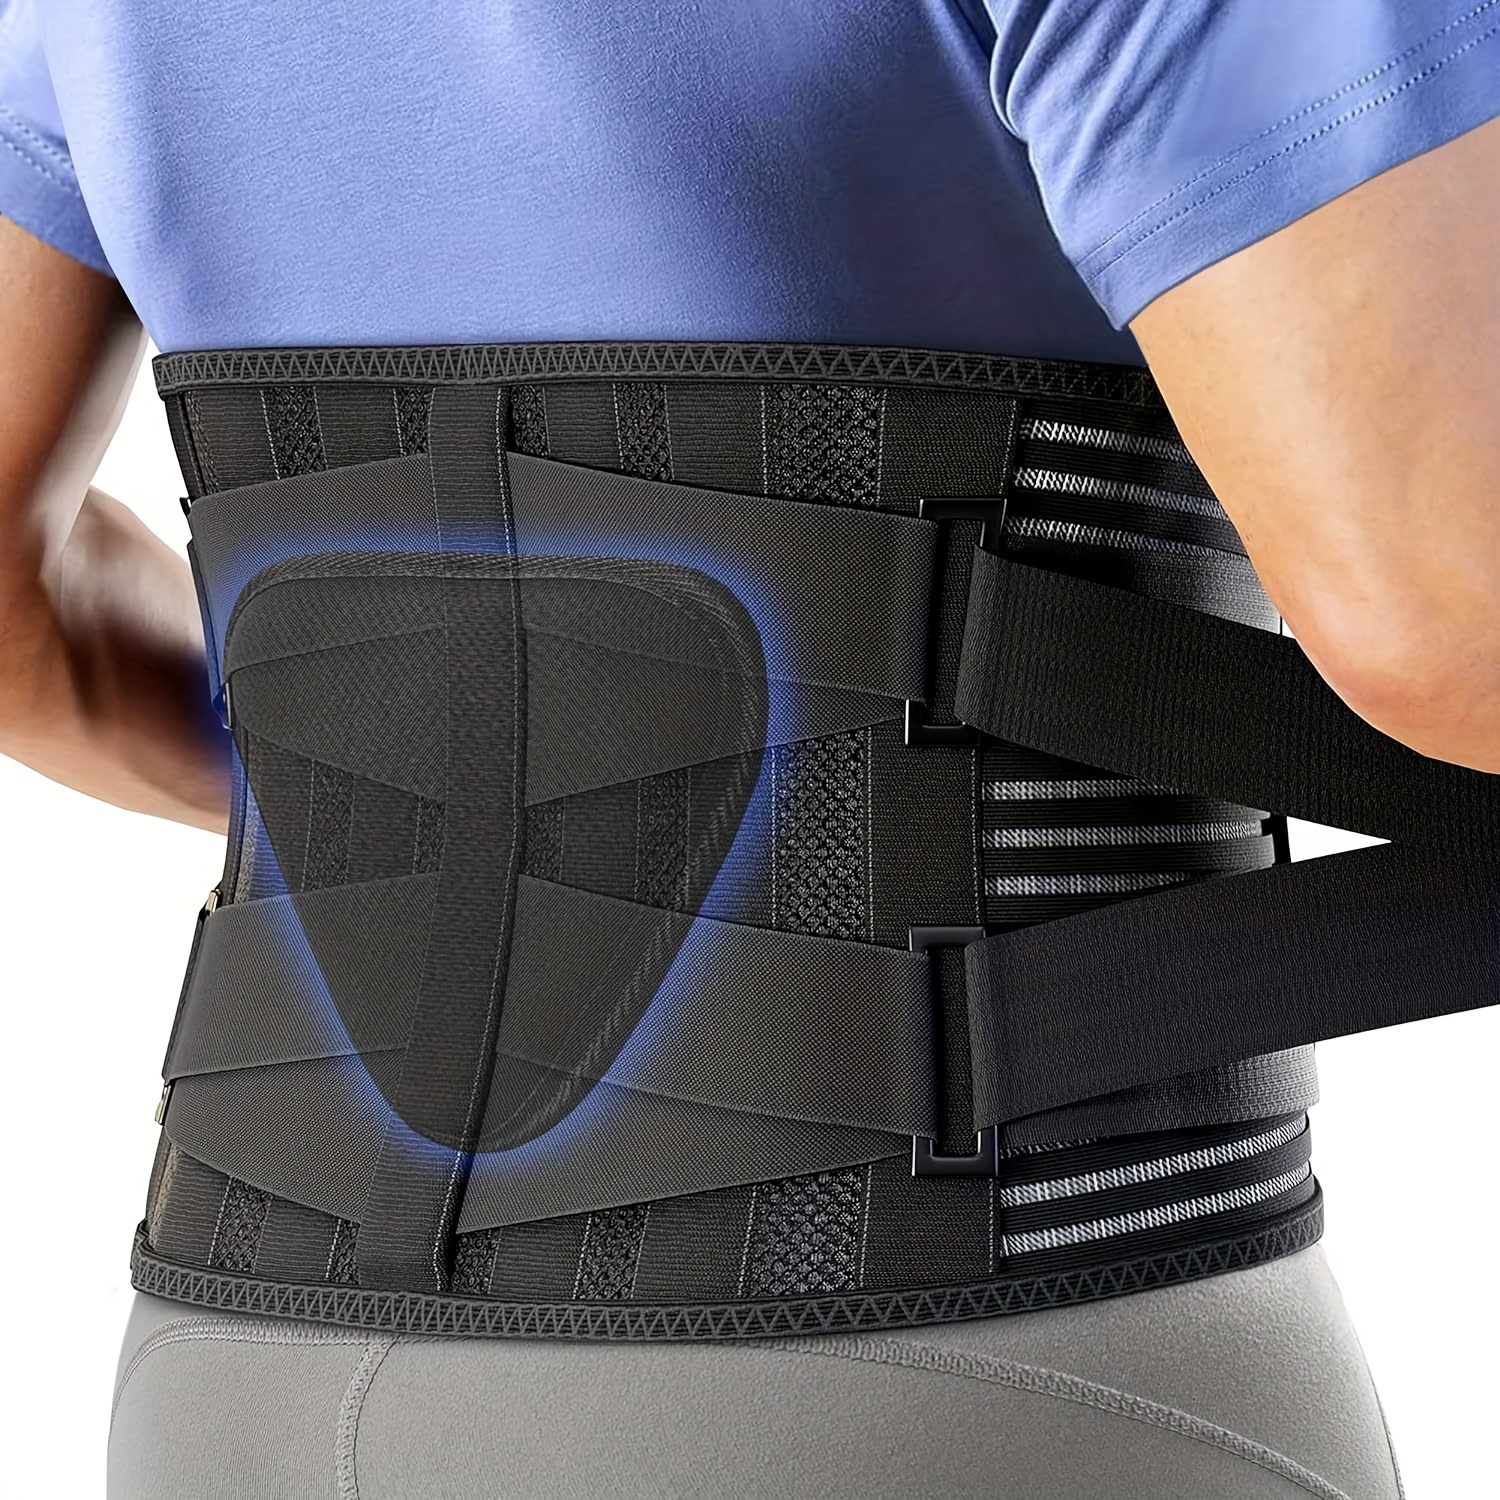 

Back Brace For Lower Back Pain, Breathable Design With Lumbar Support Pad, Immediate Relief From Sciatica, Herniated Disc, Scoliosis, Holiday Gift